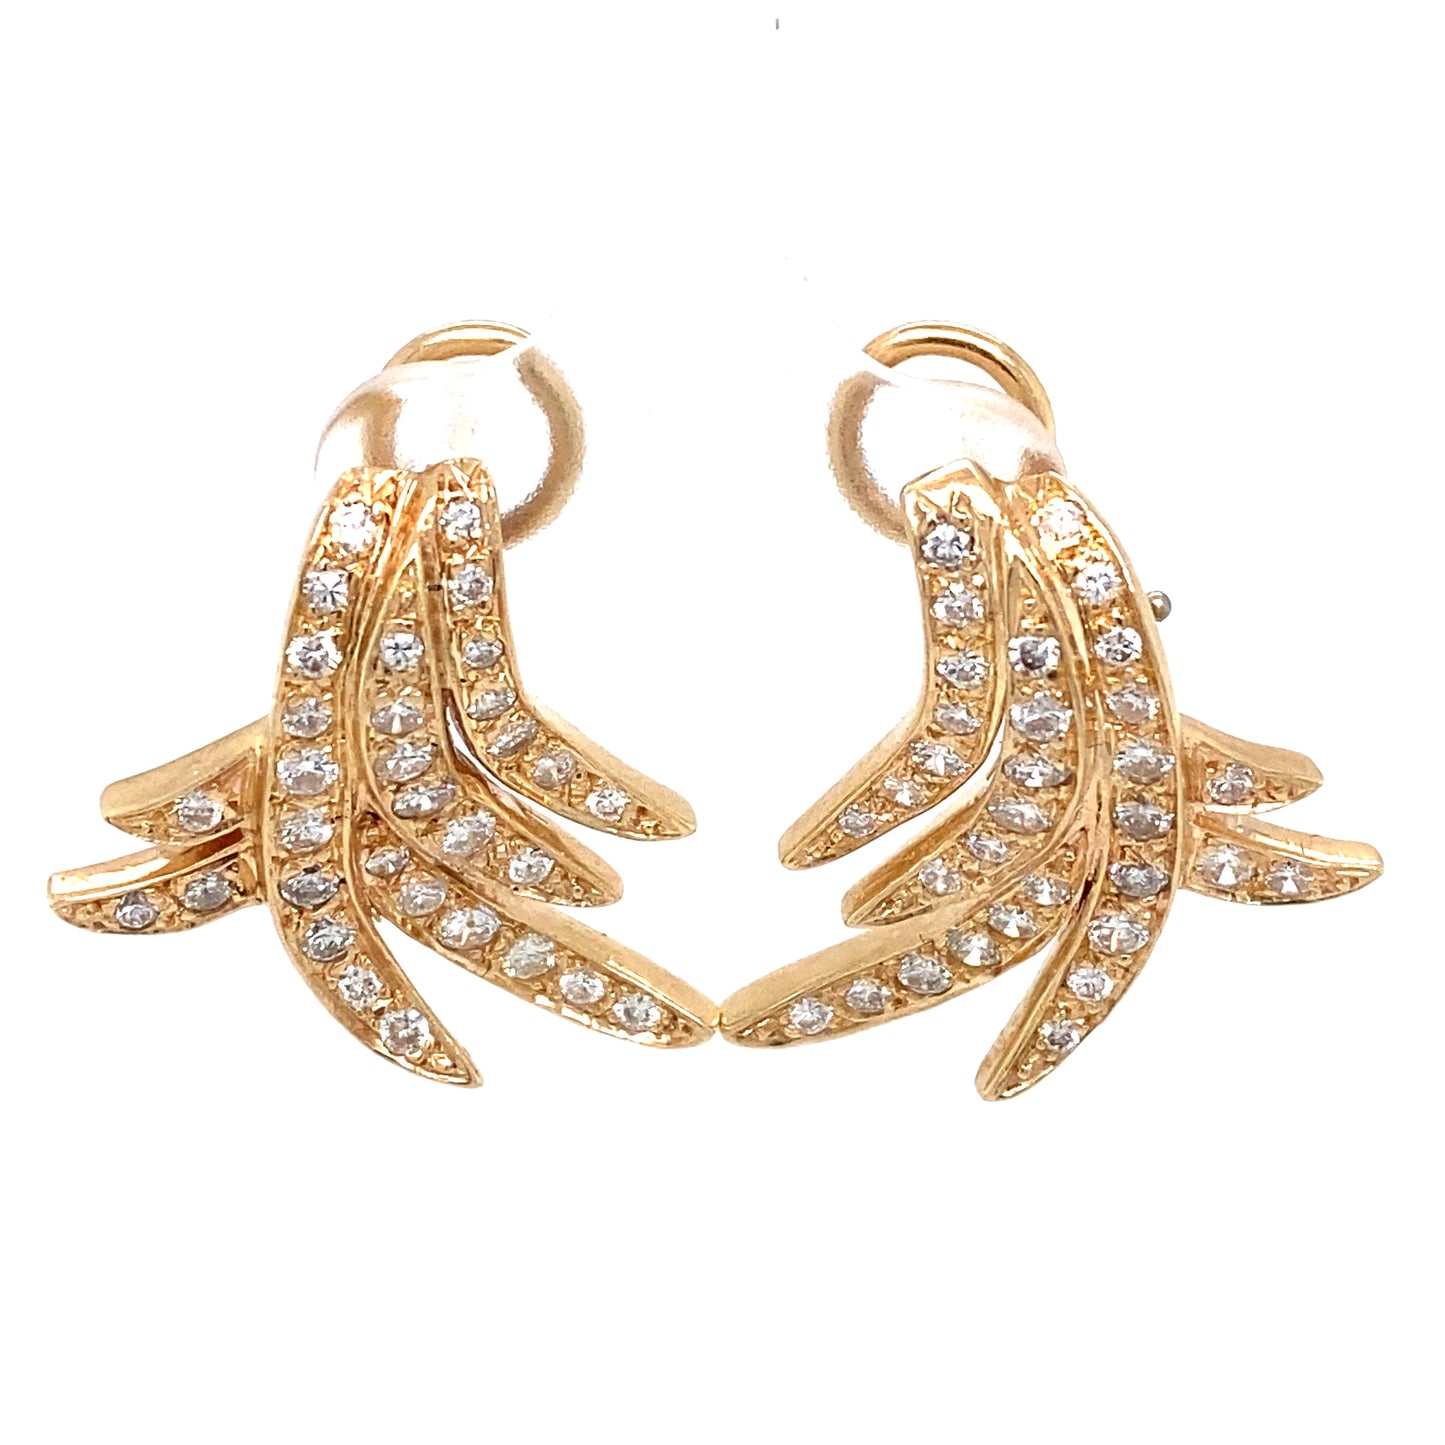 Enrique Pascual Diamond Feather Earrings in 14K Gold